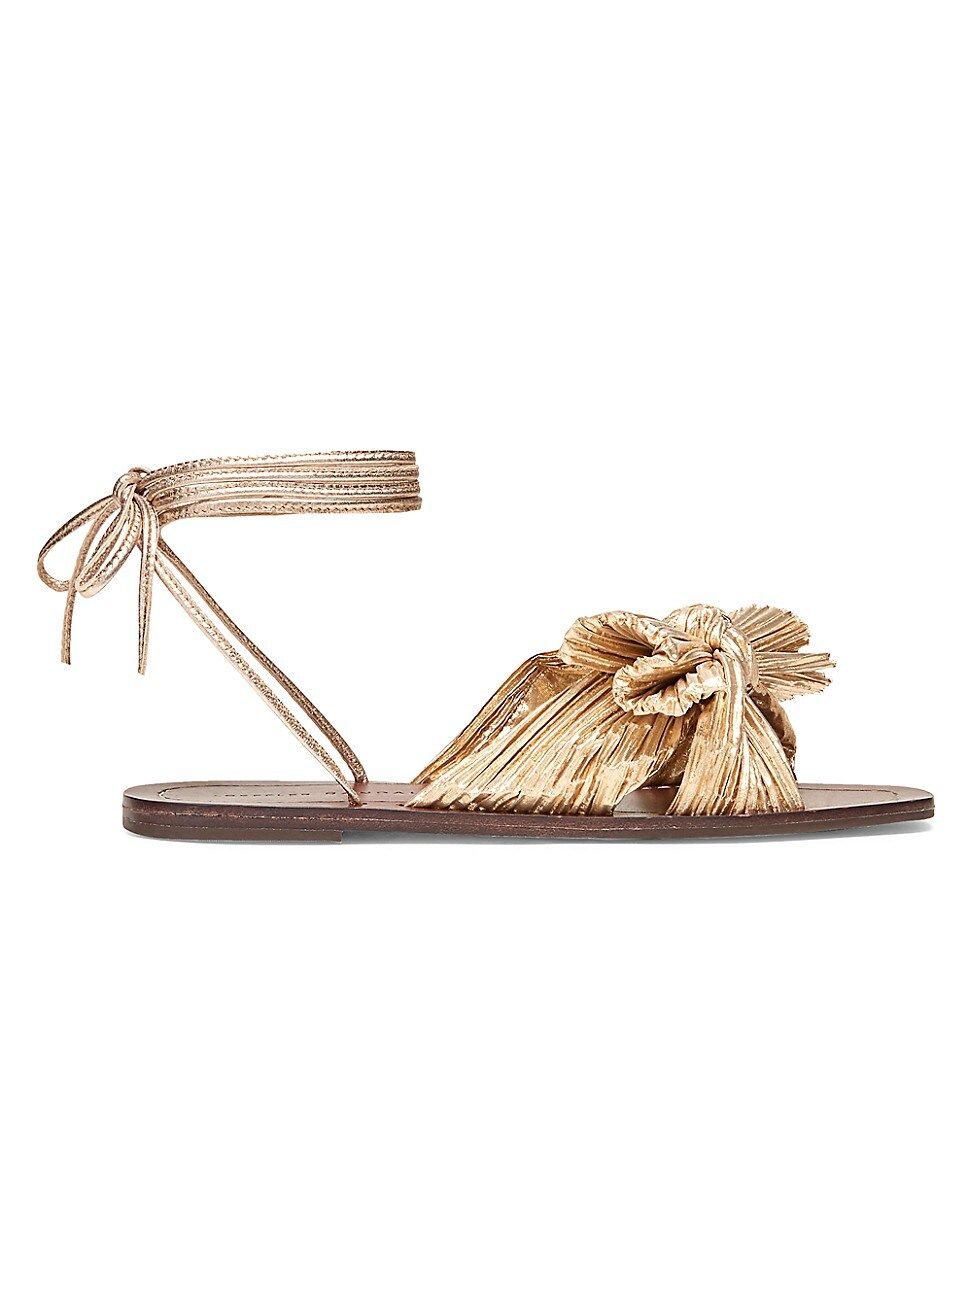 Loeffler Randall Women's Peony Ankle-Wrap Knotted Metallic Sandals - Gold - Size 7 | Saks Fifth Avenue